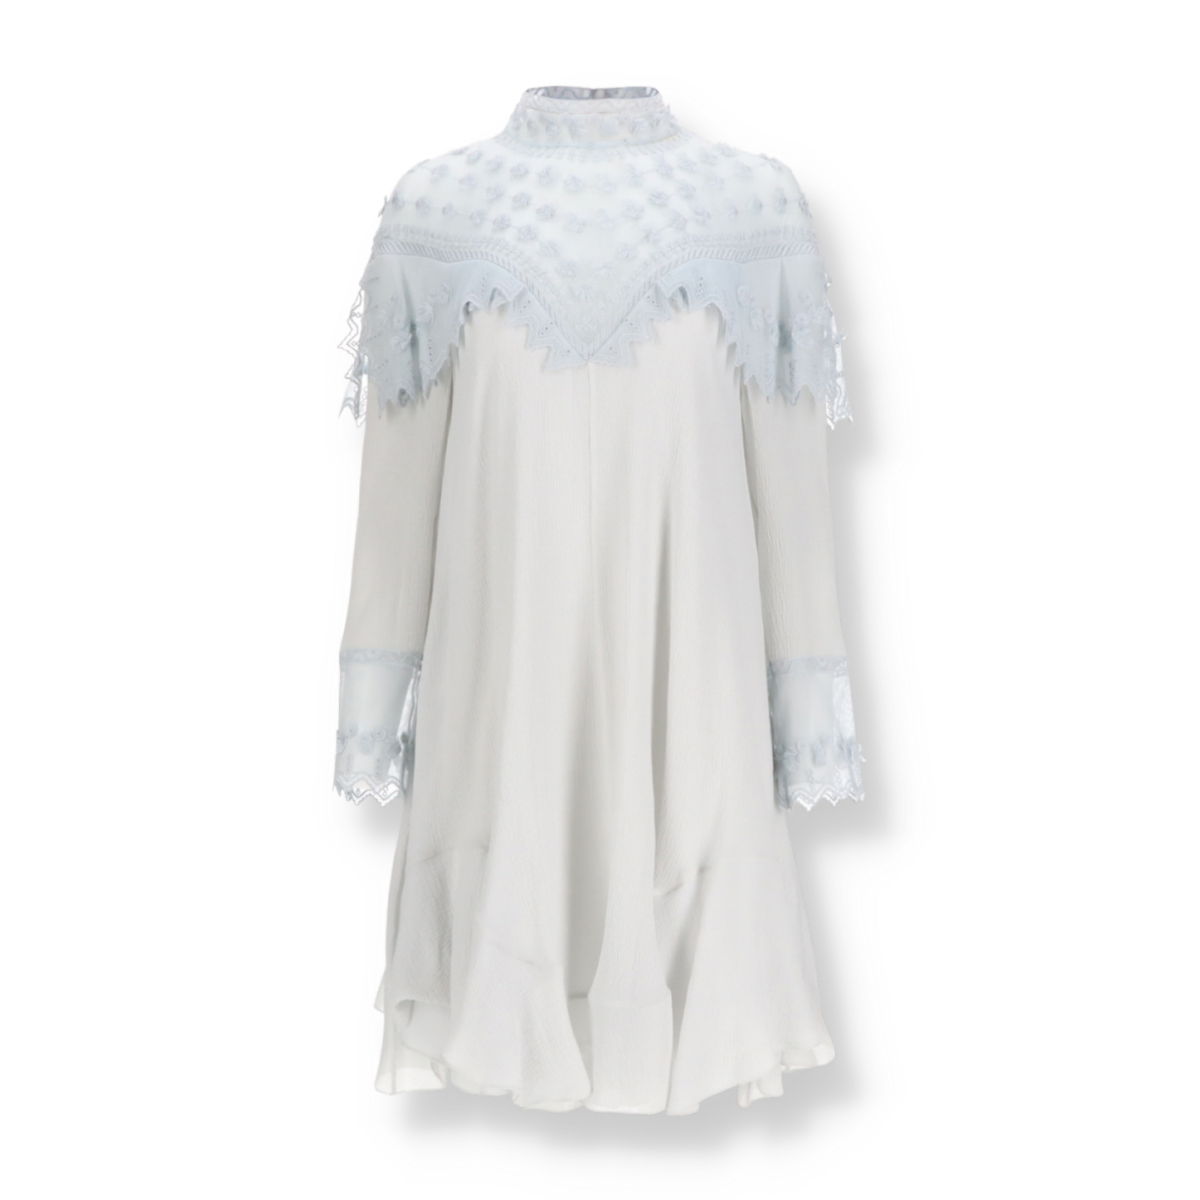 Chloé dress withembroidery - Outlet